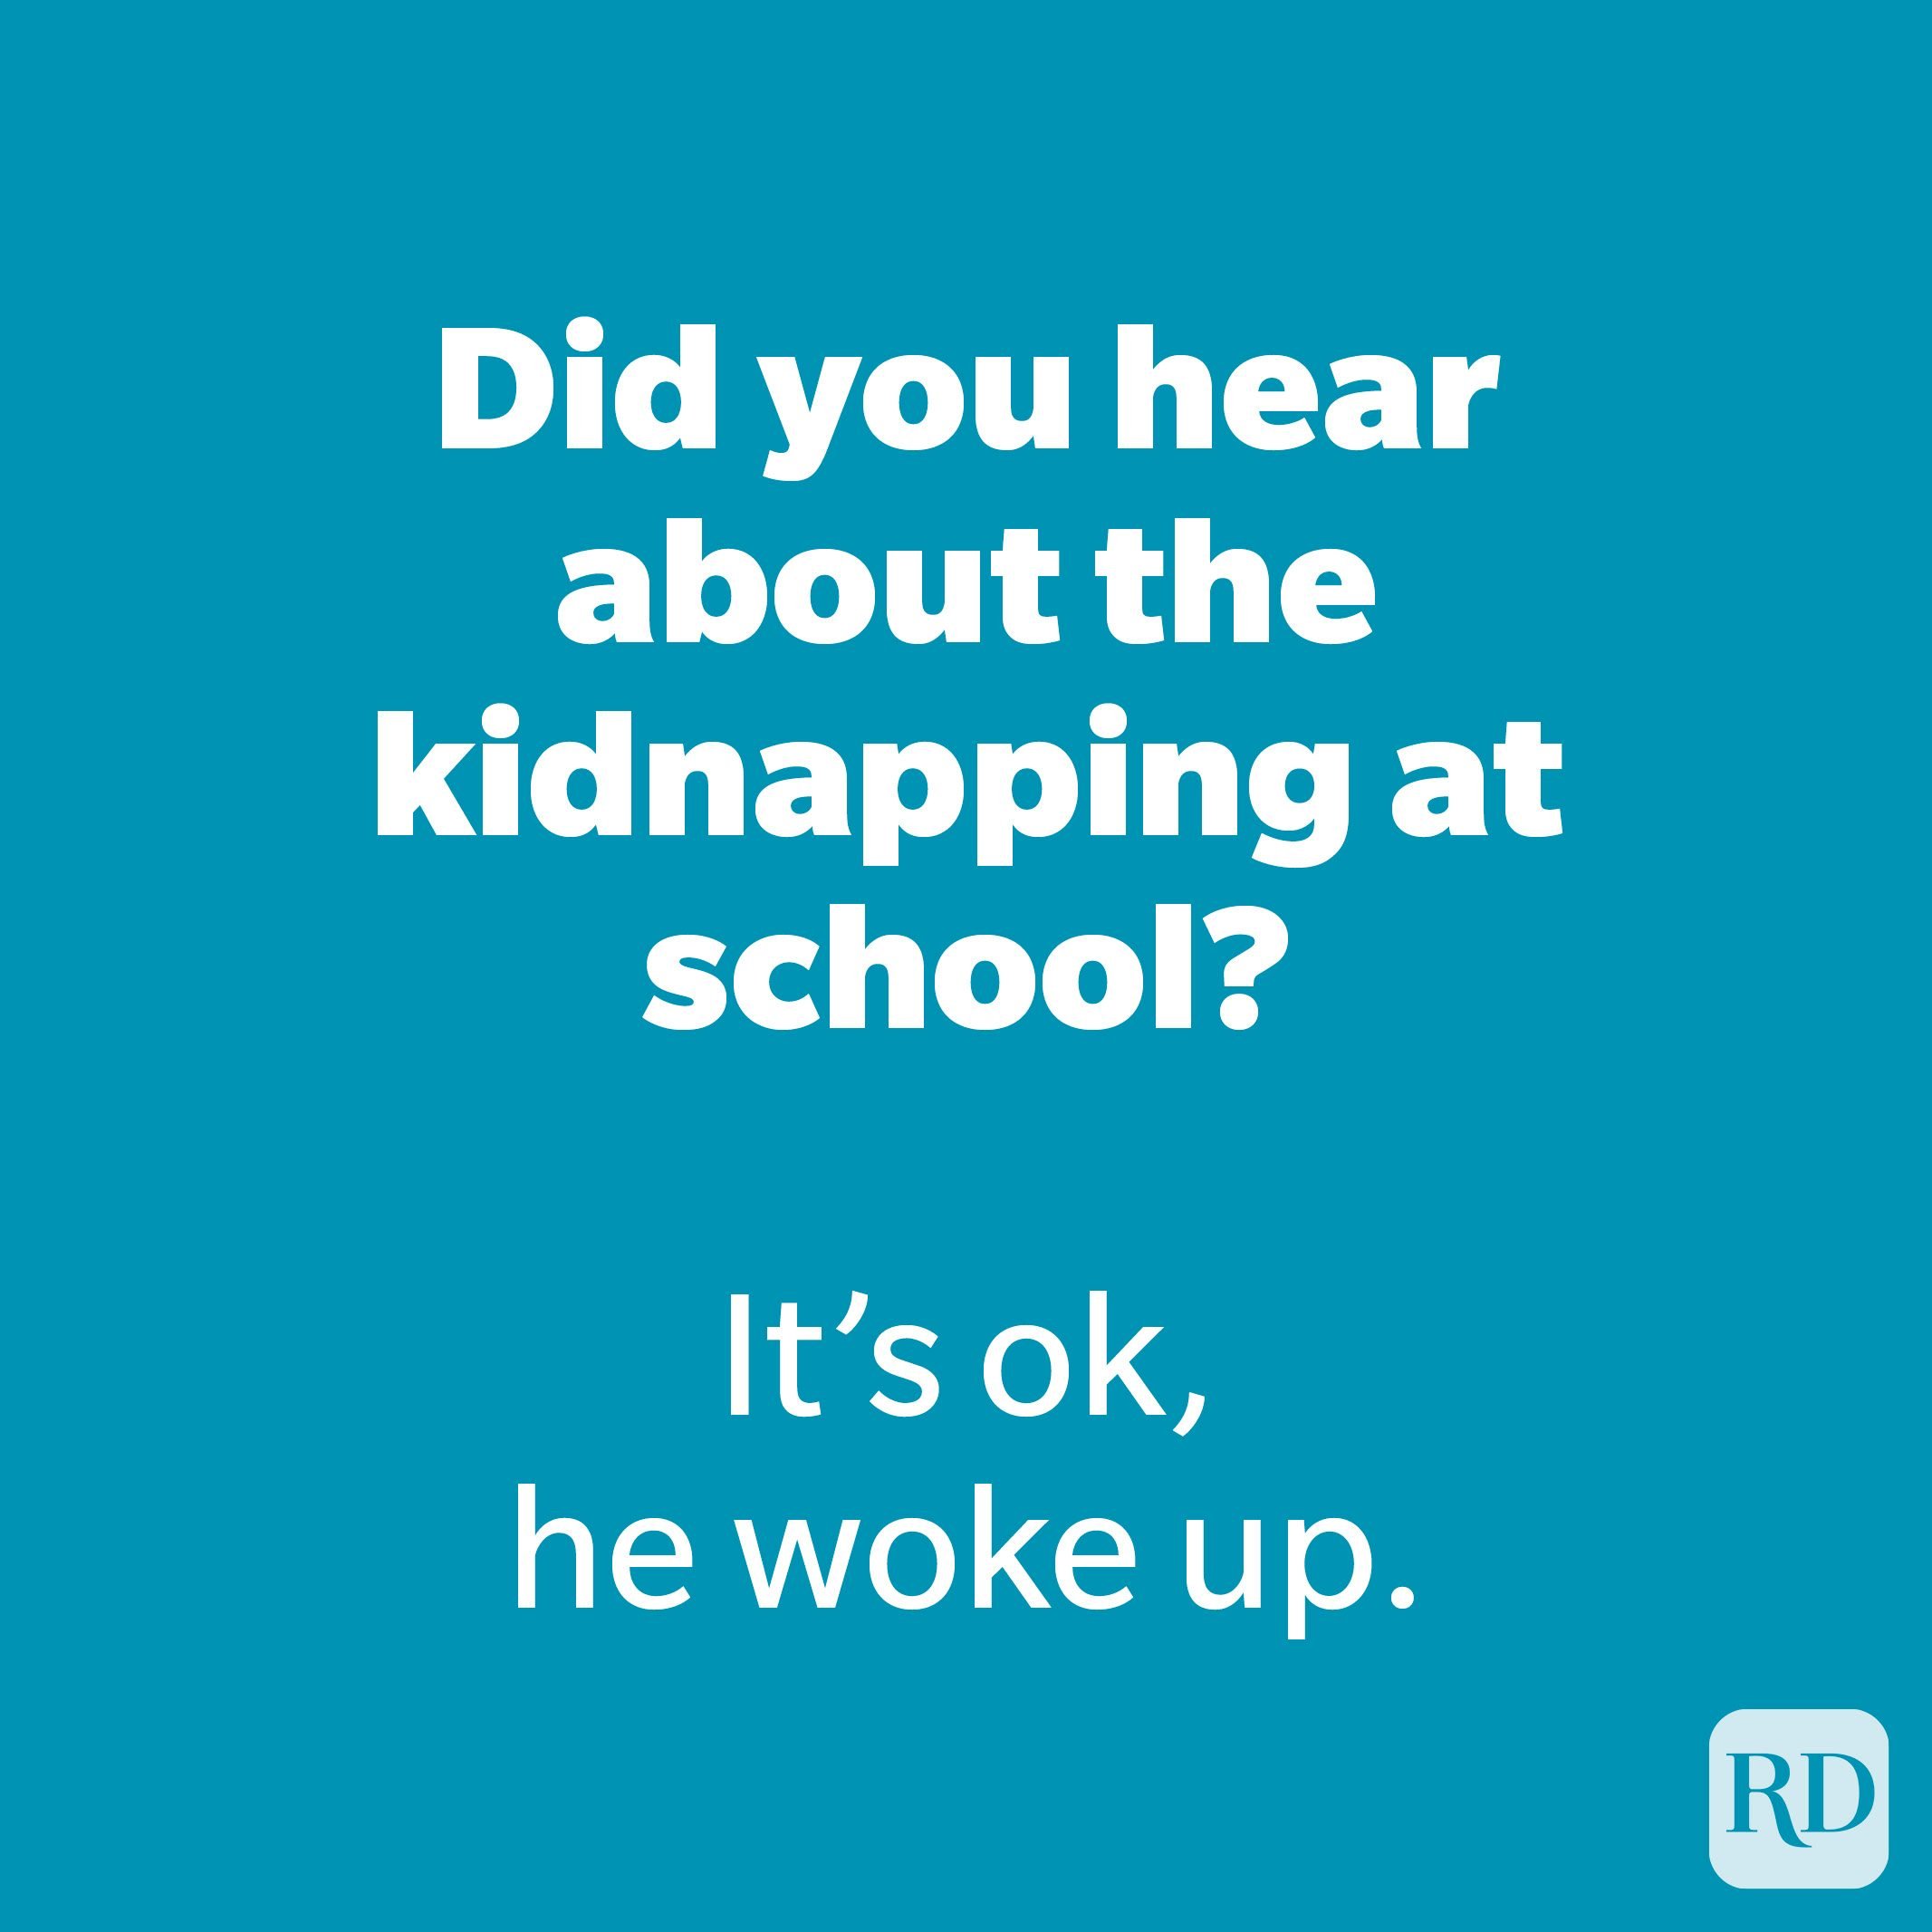 Did you hear about the kidnapping at school? 